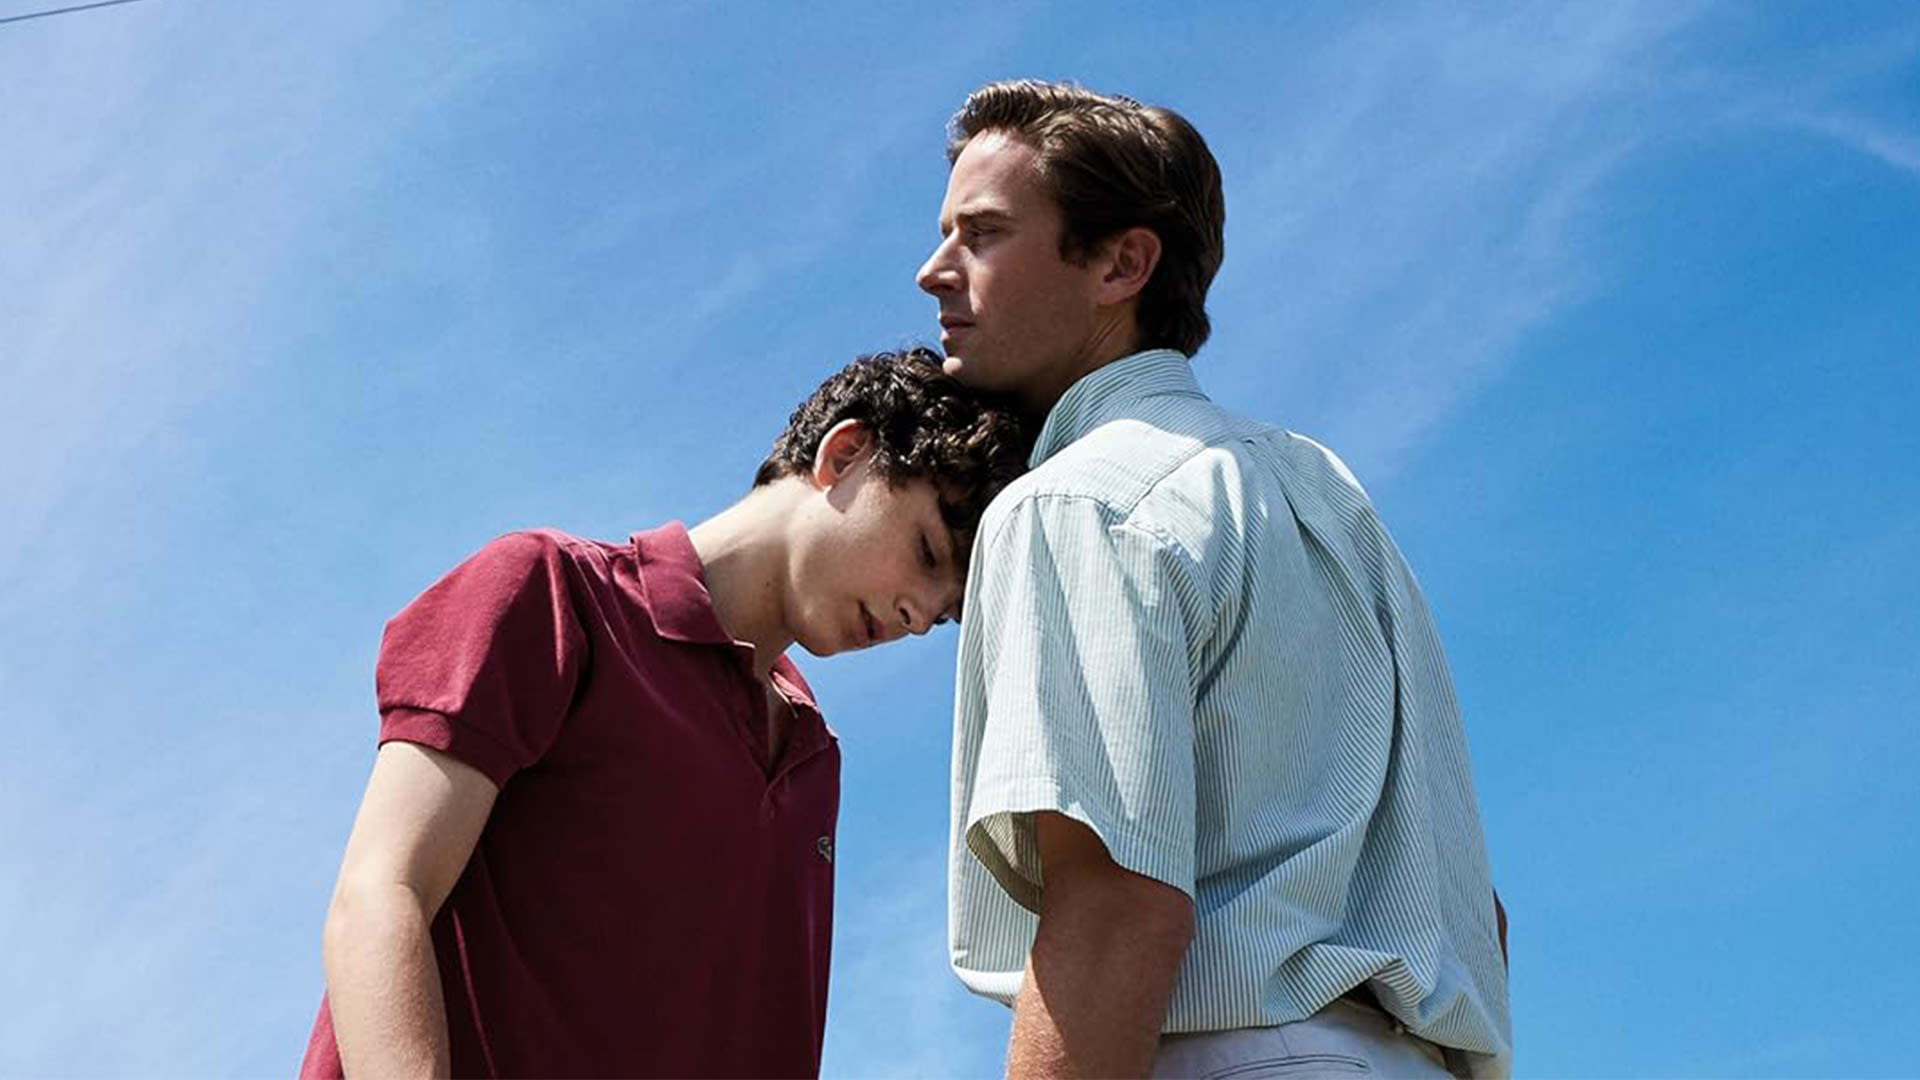 Netflix movie of the day: Call Me By Your Name is a beautiful romance with 94% on Rotten Tomatoes